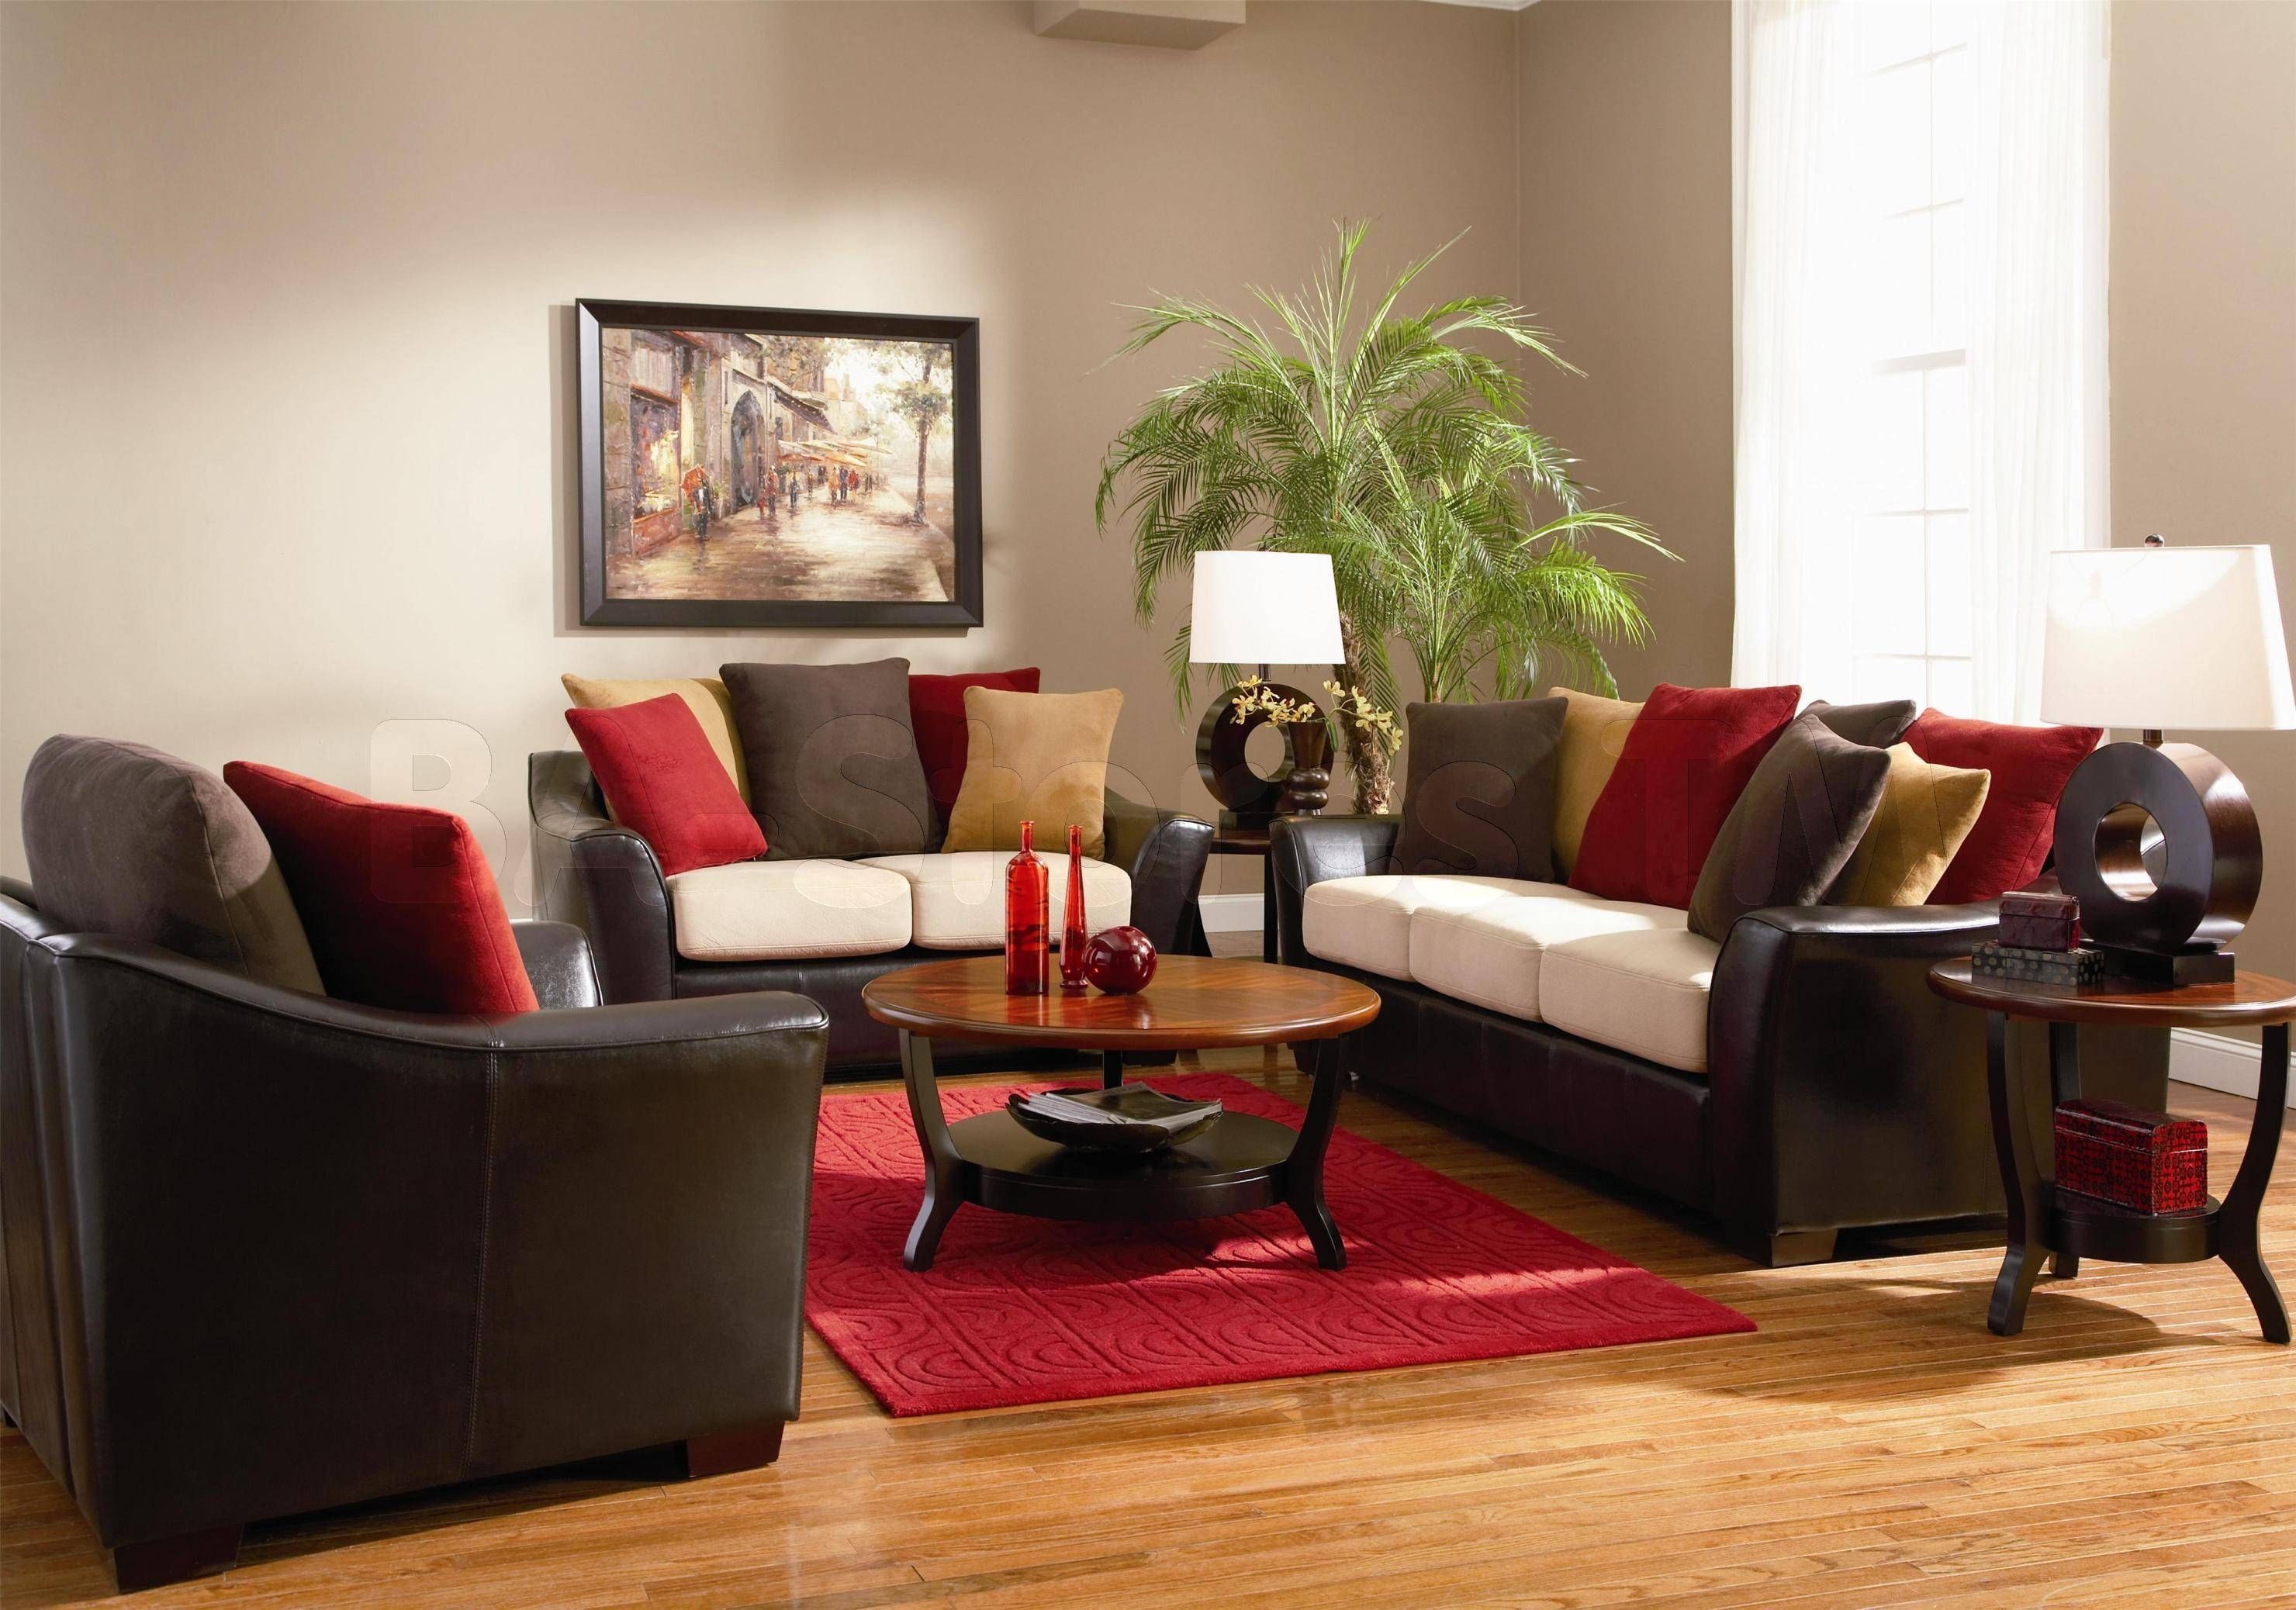 How To Decorate Living Room With Brown Leather Sofa Intended For Brown Sofas Decorating (View 3 of 15)